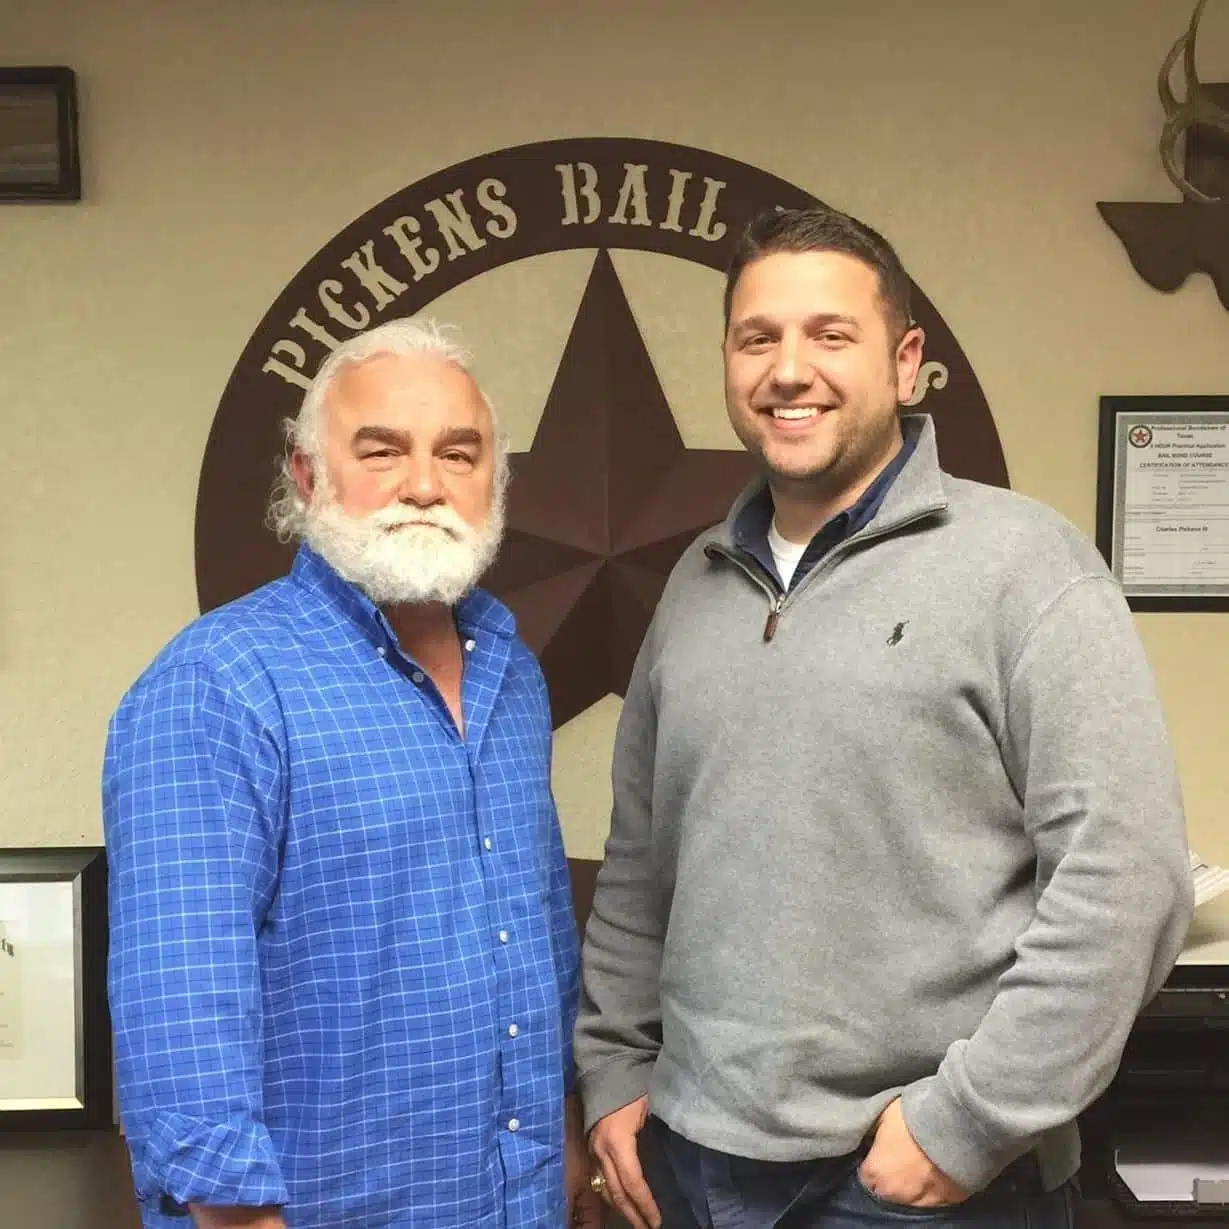 Owner and son standing in the Pickens Bail Bonds office in Waco, TX, a family-operated business dedicated to helping people in need with respect and care for over 25 years.